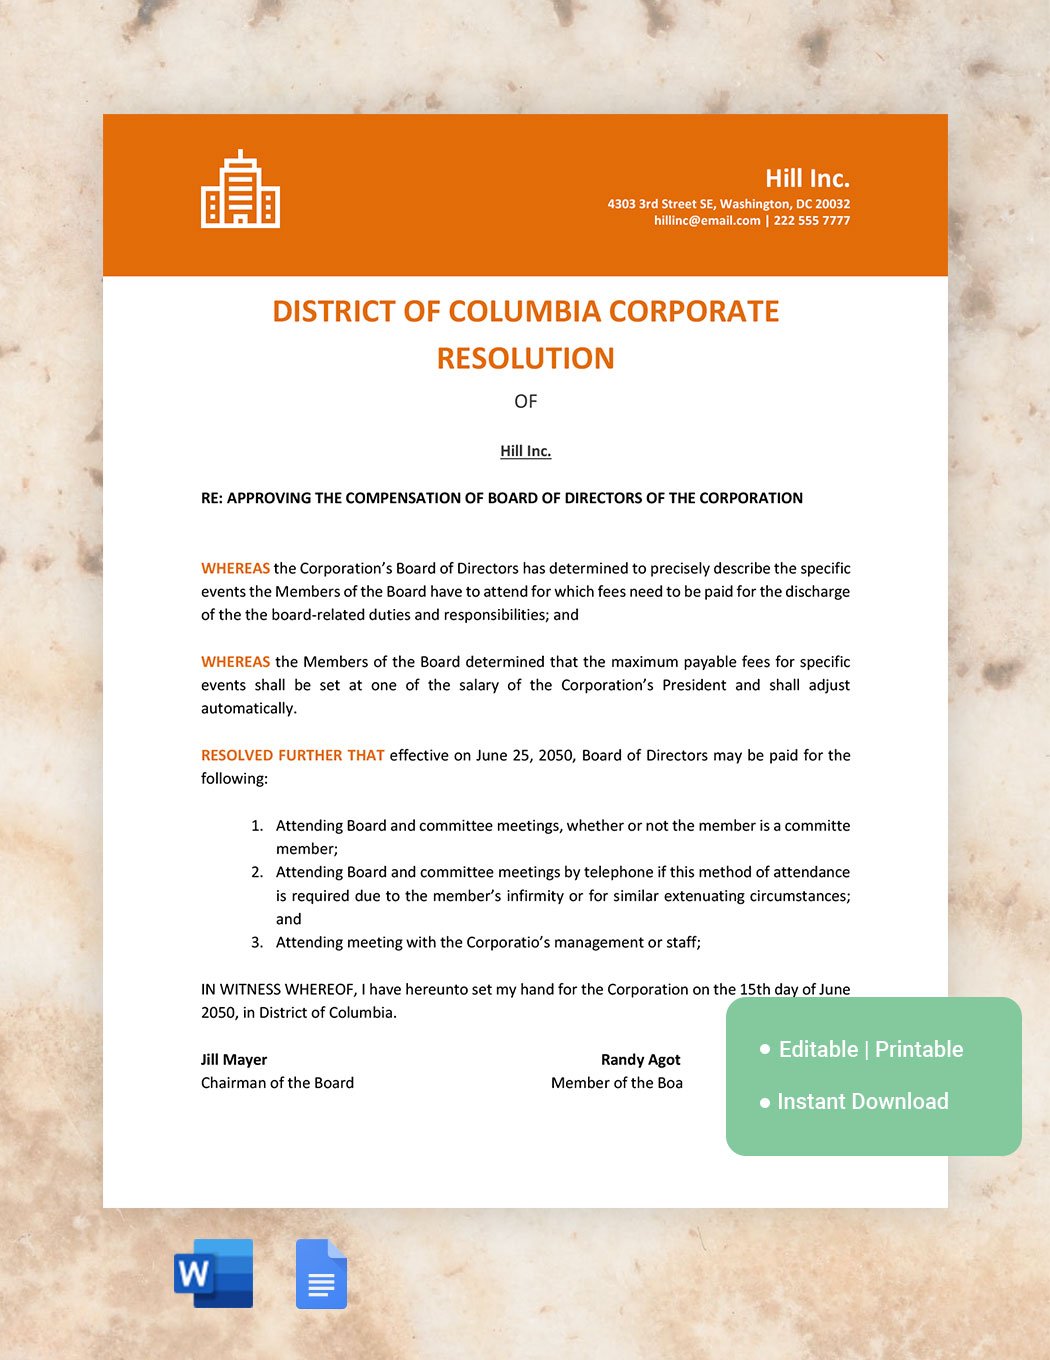 District Of Columbia Corporate Resolution Template in Word, Google Docs